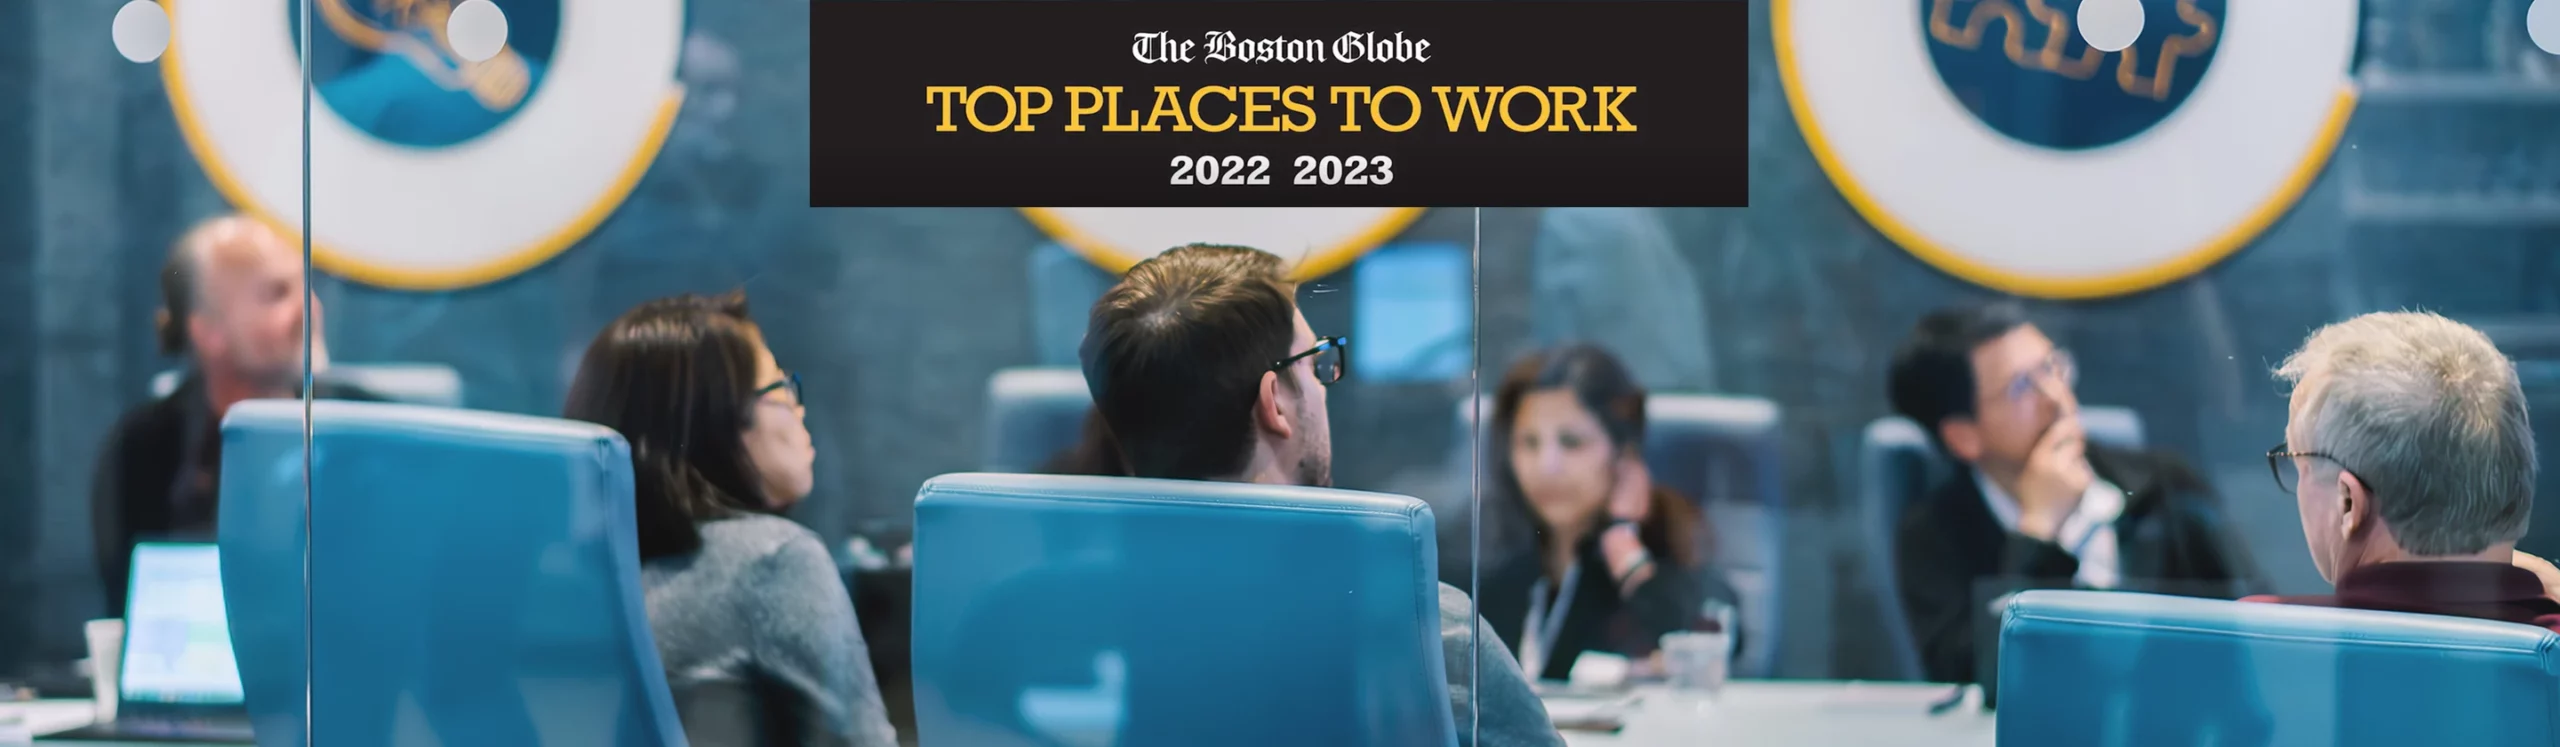 Kymera employees in a meeting room with “The Boston Globe TOP PLACES TO WORK 2022 2023” banner above